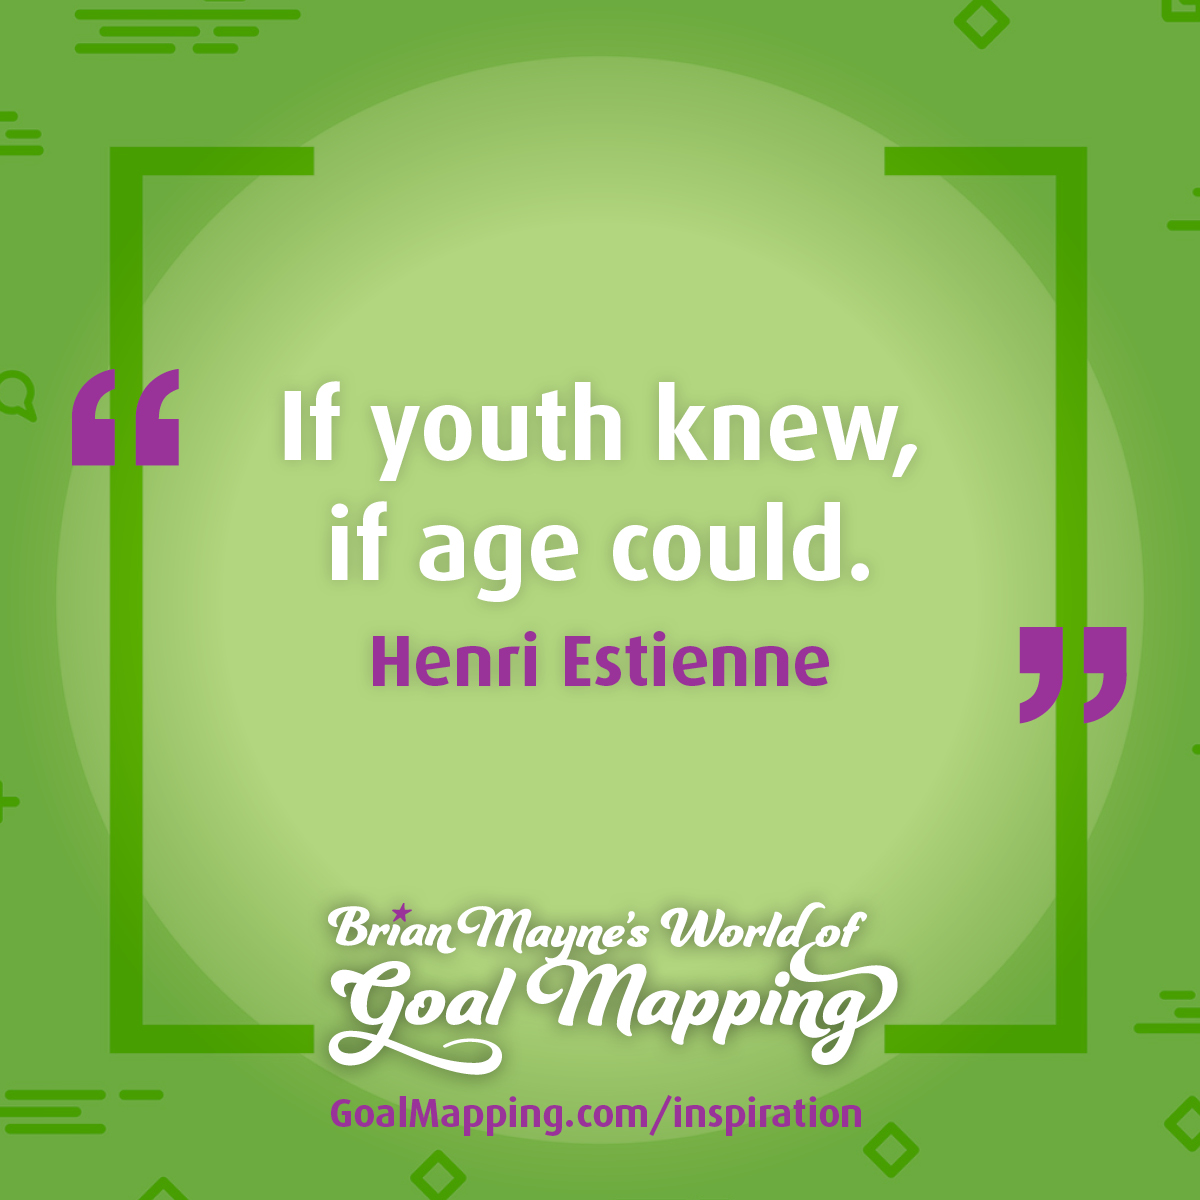 "If youth knew, if age could." Henri Estienne